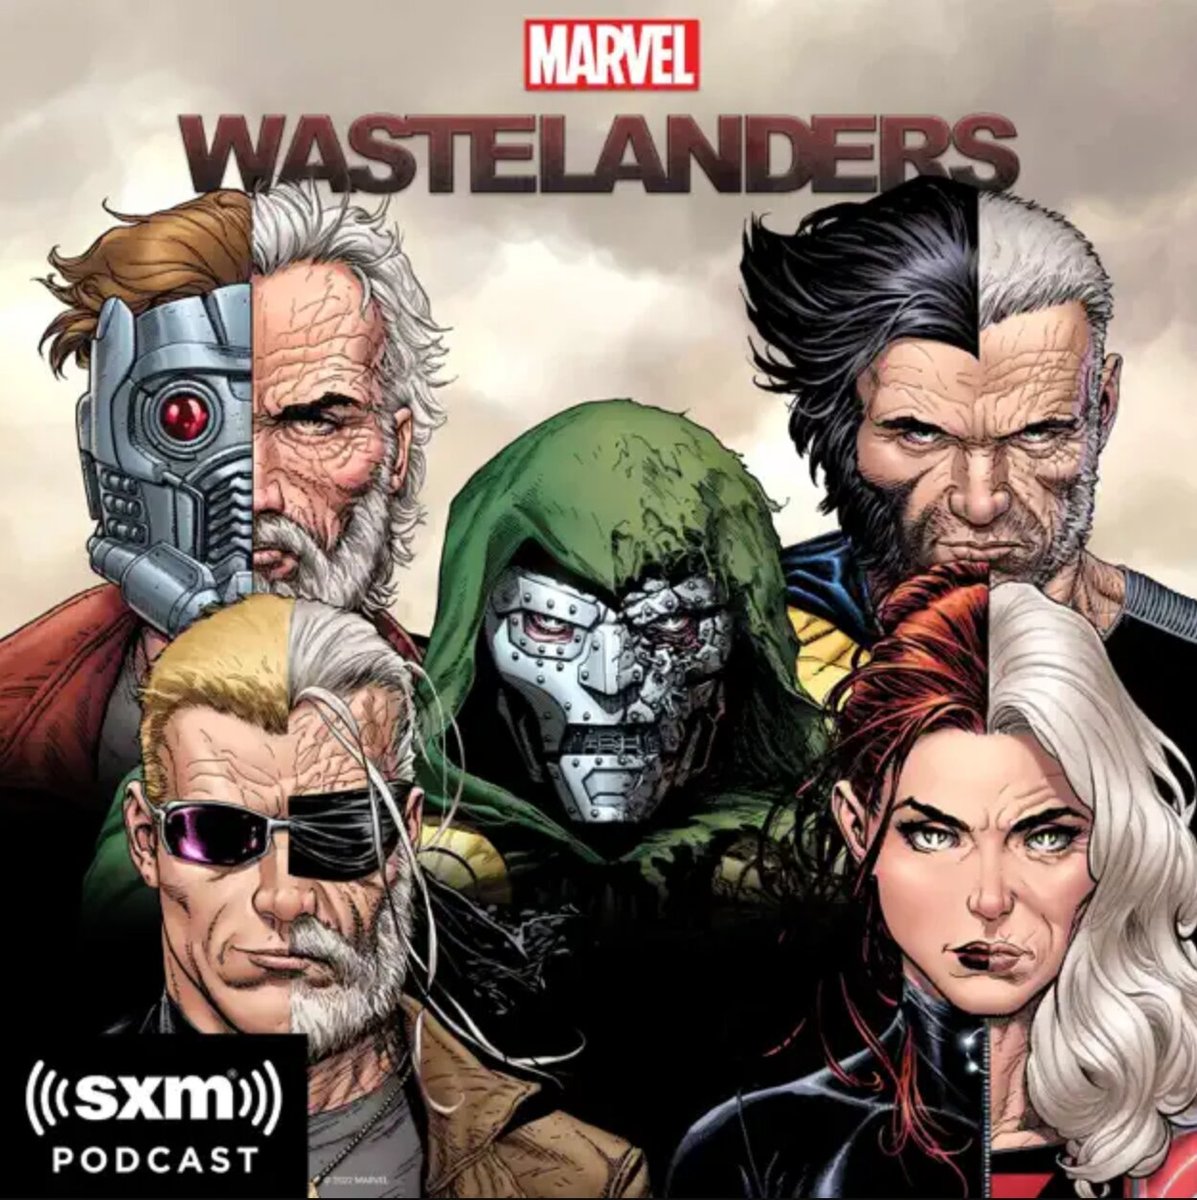 The Wastelanders, featuring Wolverine, Black Widow, Hawkeye, Doctor Doom, and Star-Lord. All their faces are split in half, showing their young and old selves on either side.